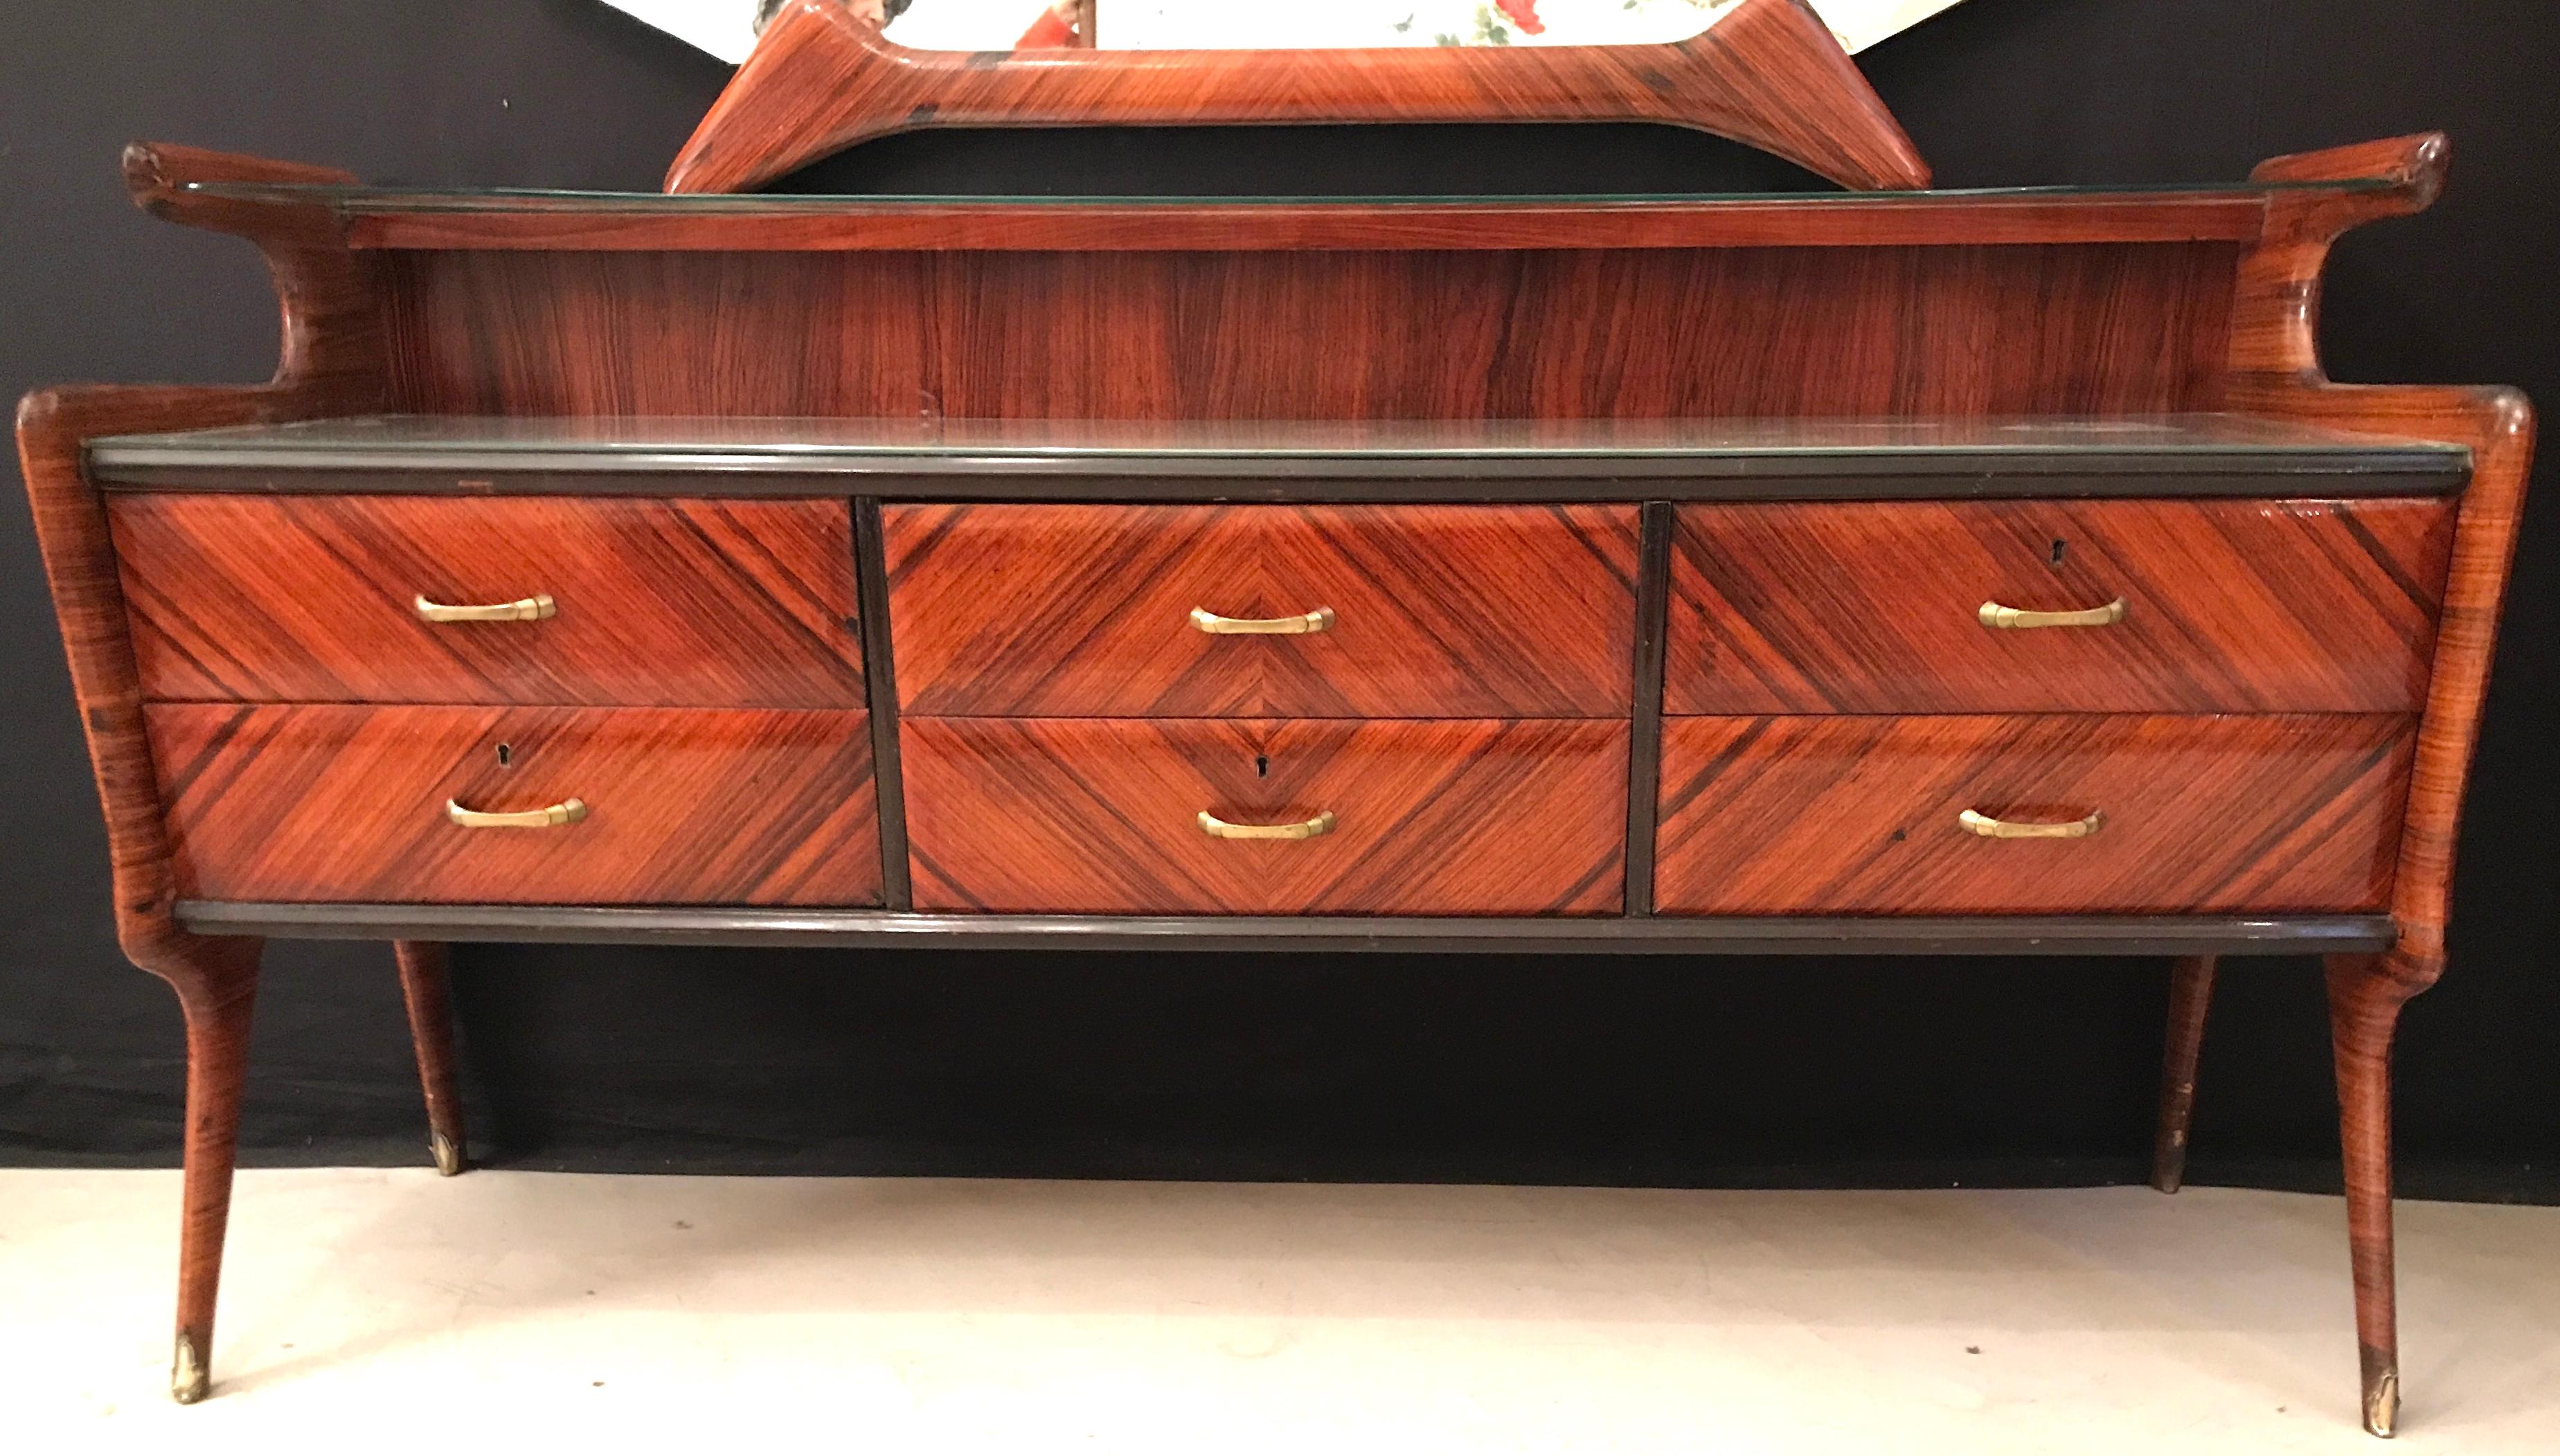 With six drawers. Gray painted glass top.